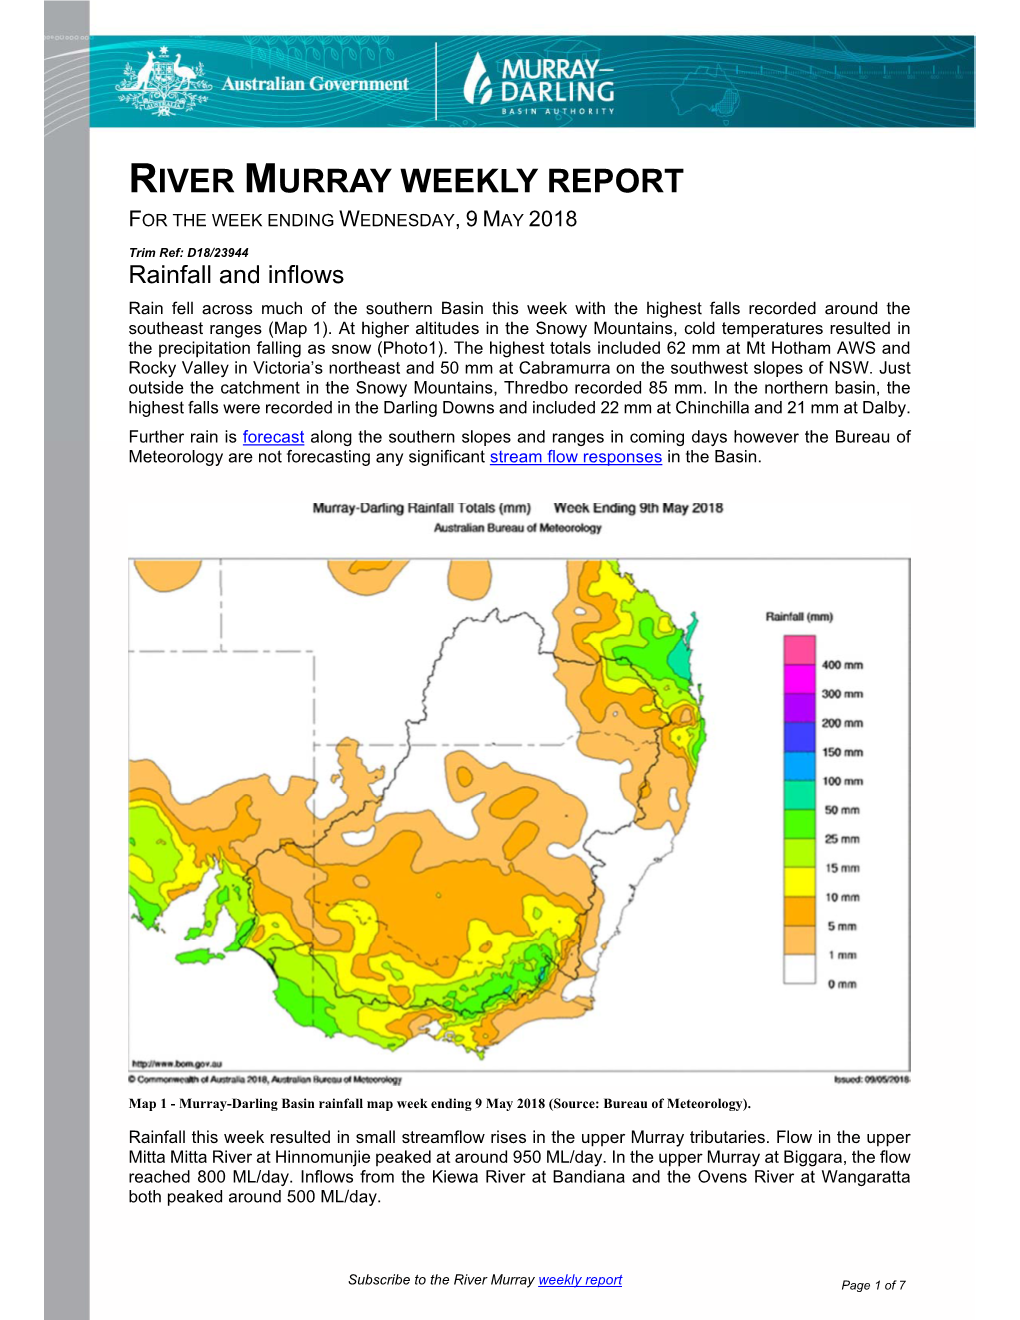 River Murray Weekly Report for the Week Ending Wednesday, 9 May 2018